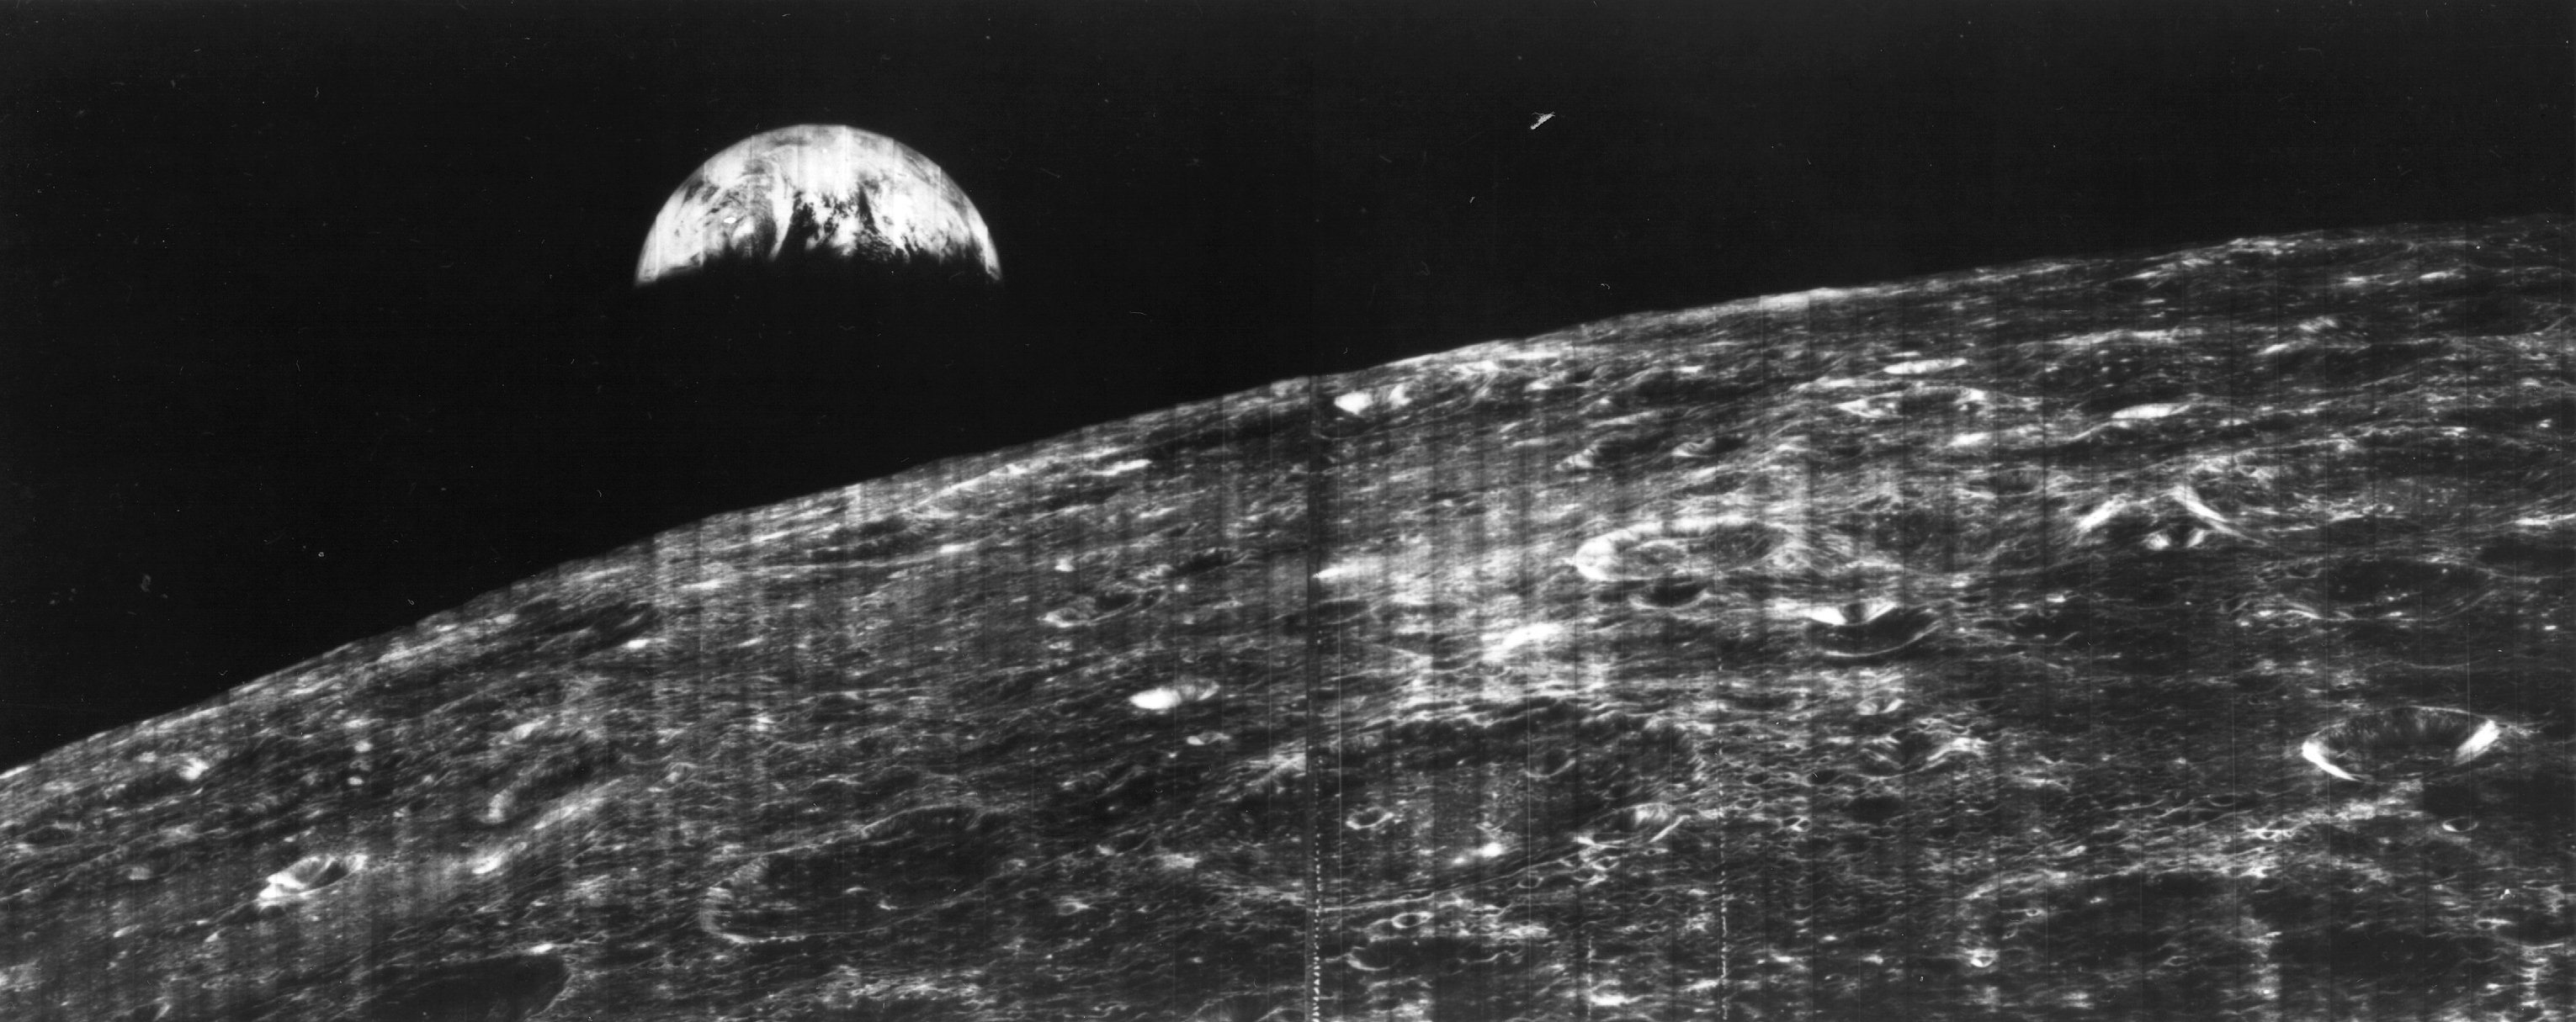 1966 image of earth